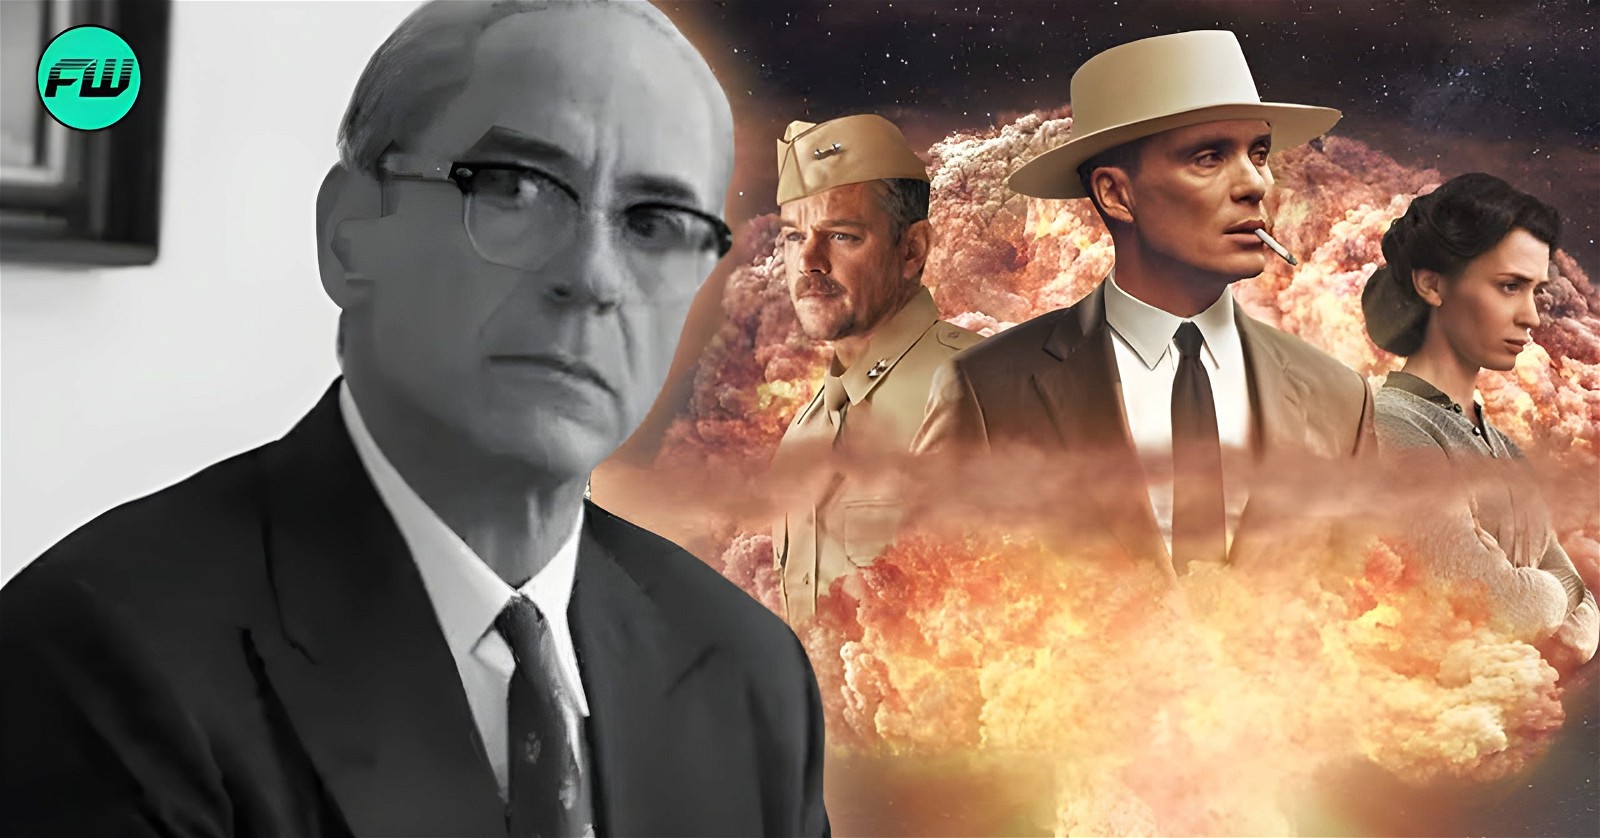 RDJ Fans Demand Oscar As Oppenheimer Star Annihilates All Competition In $100M Movie